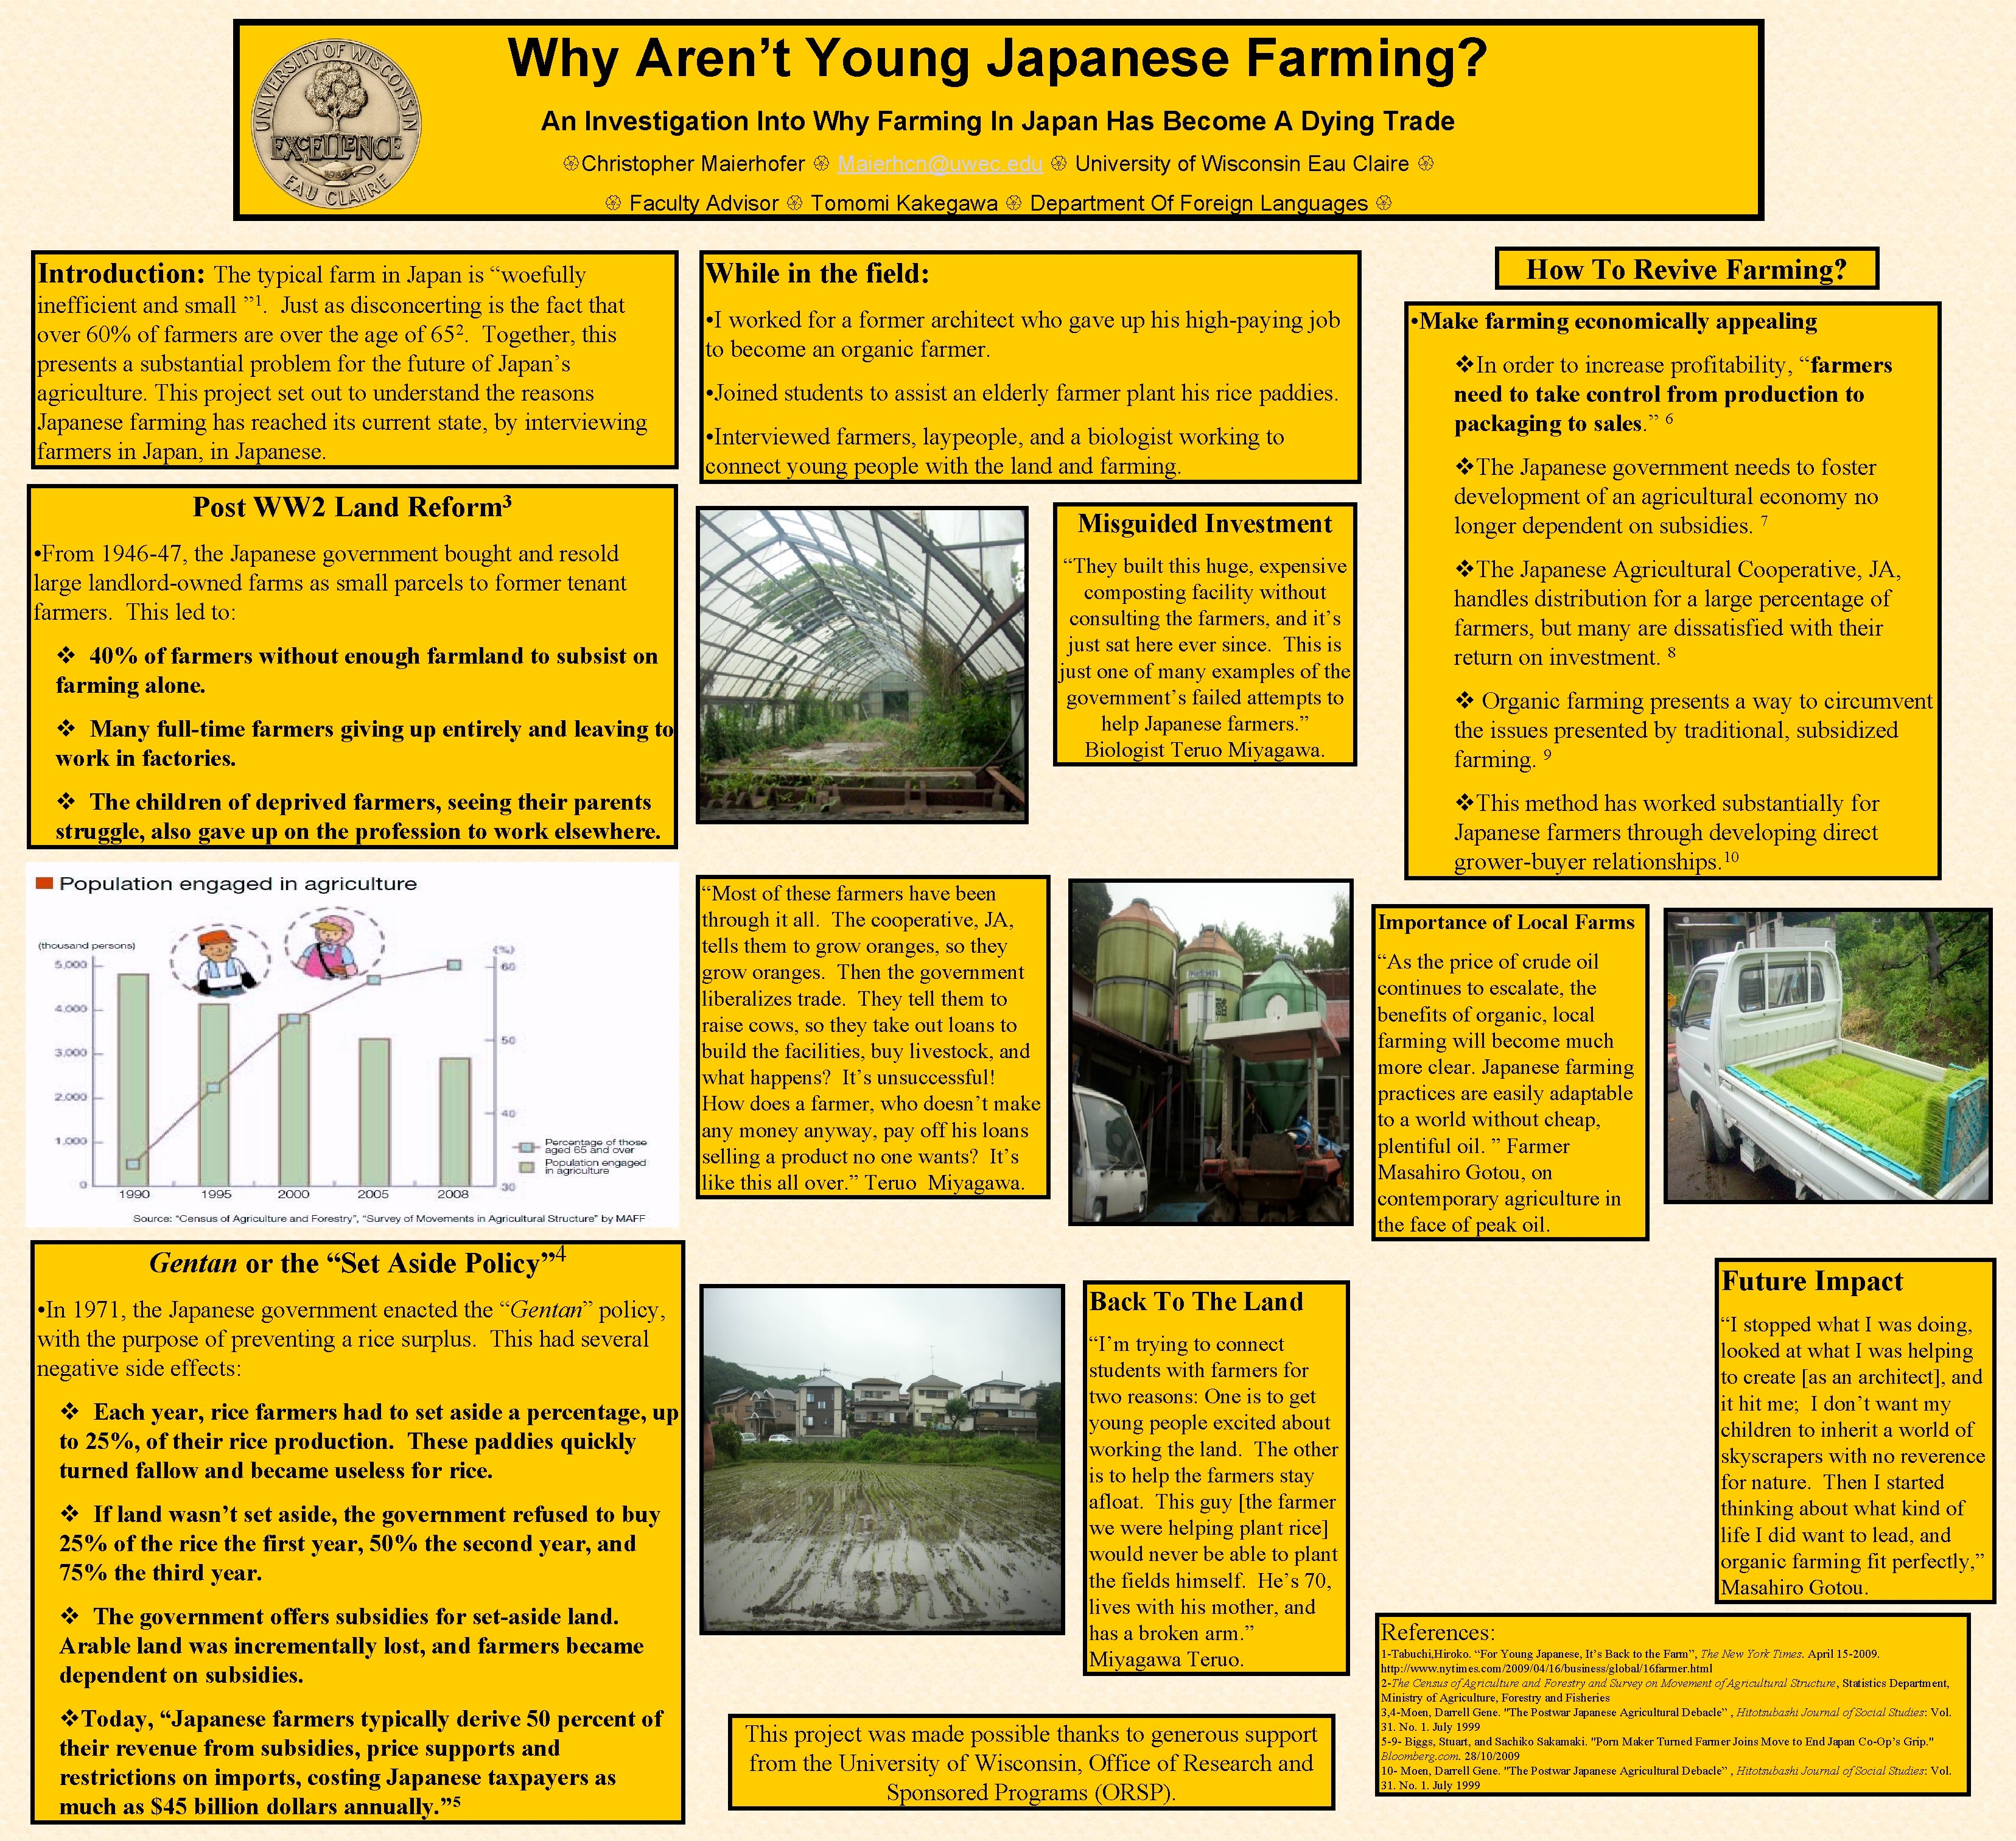 Why Aren’t Young Japanese Farming? An Investigation Into Why Farming In Japan Has Become